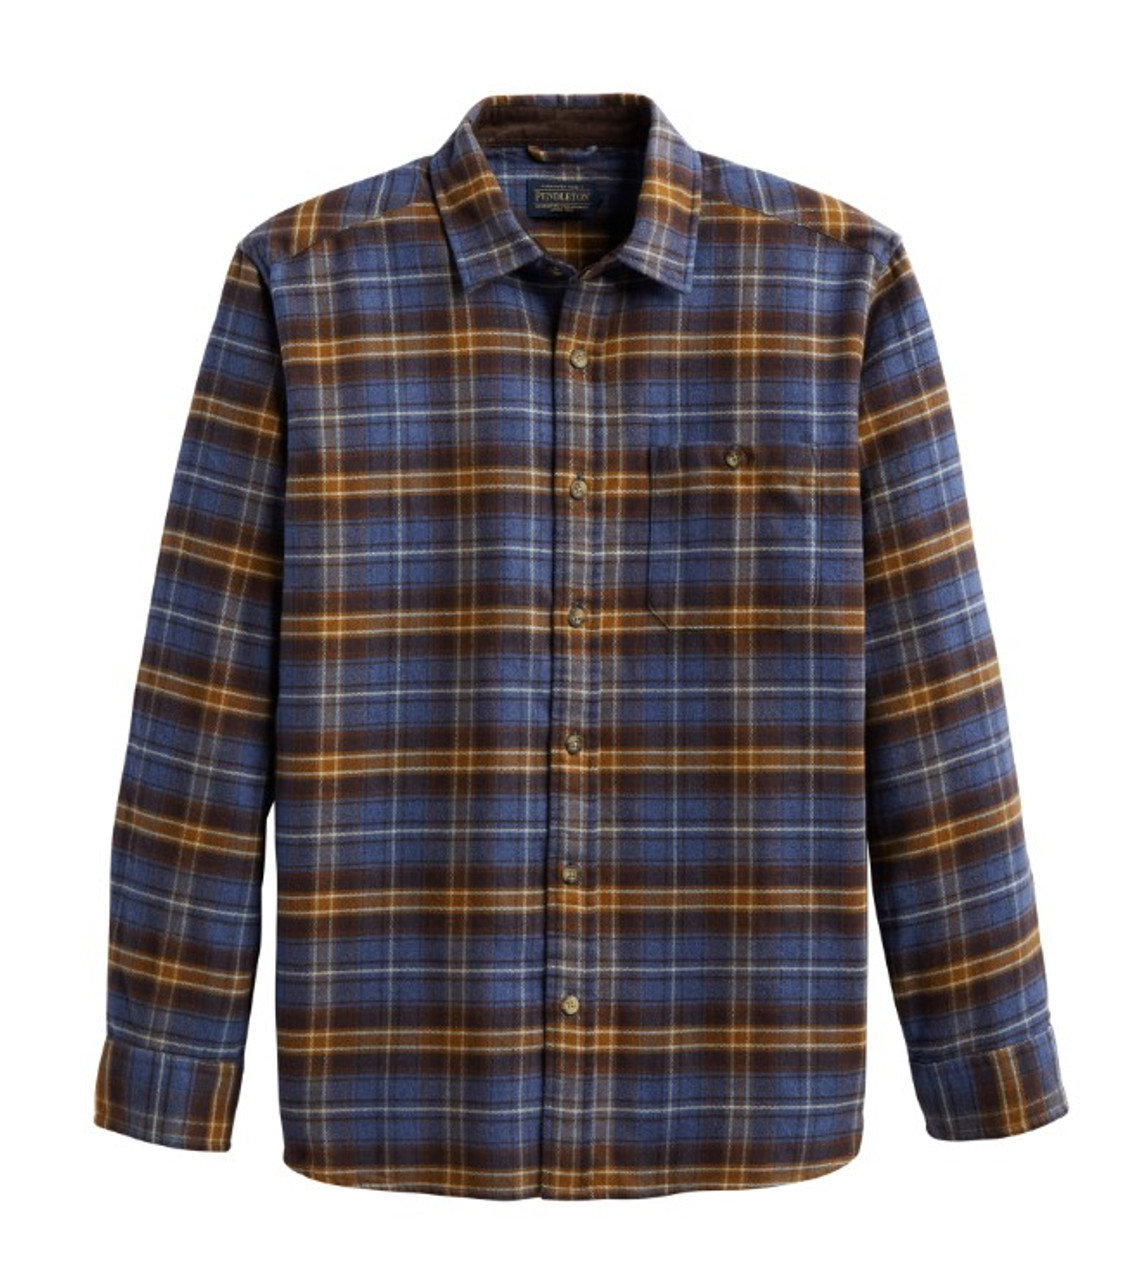 Outdoor Shirts for Men  Mens flannel, Mens shirts, Flannel shirt